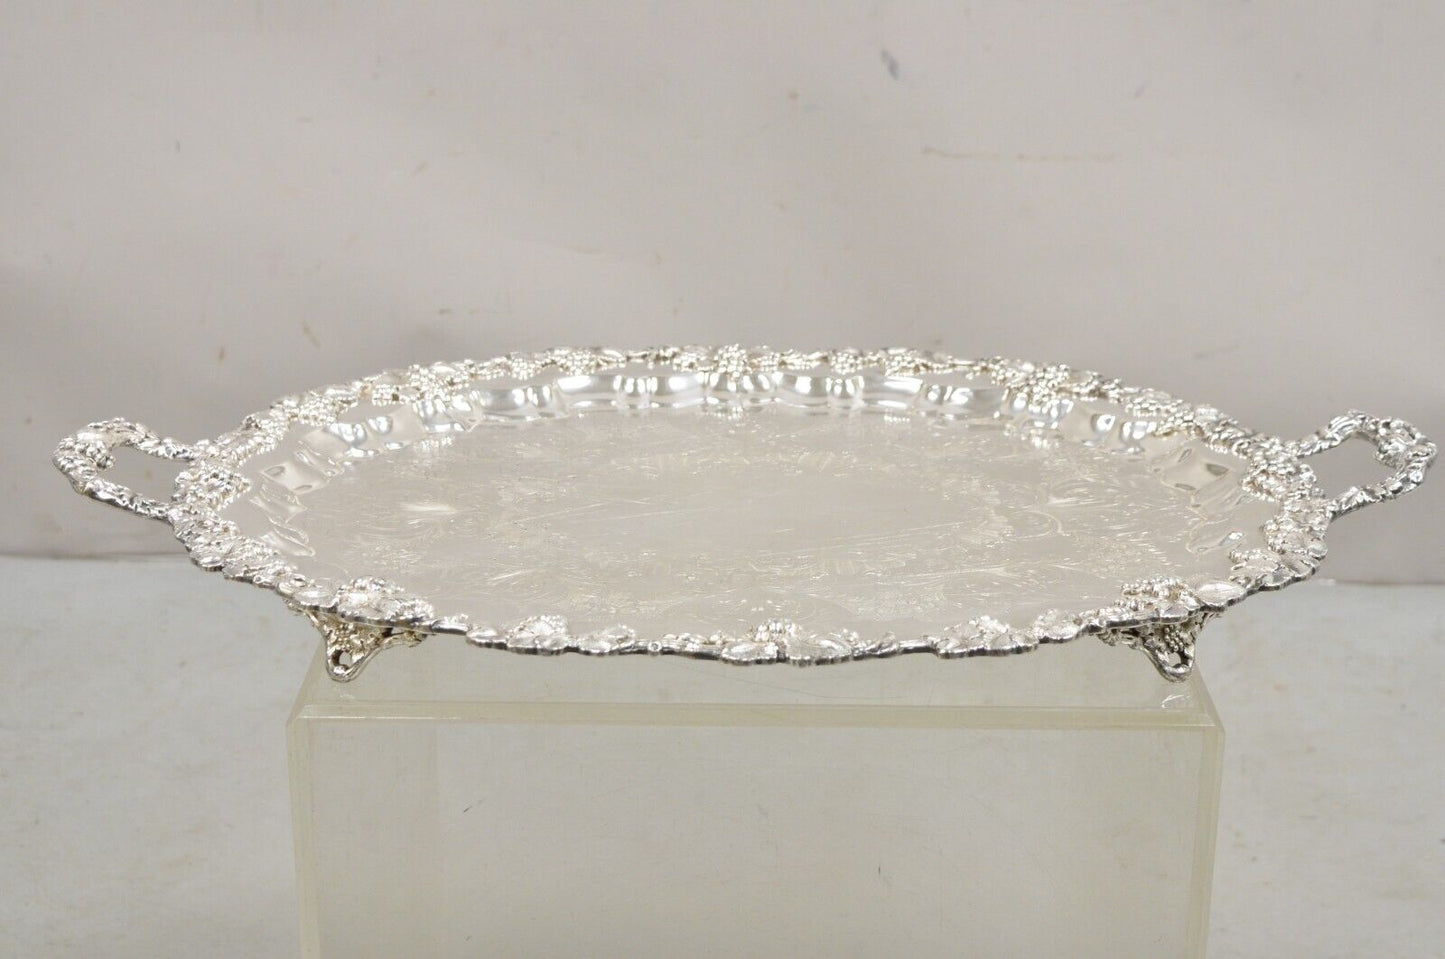 Antique English Sheffield Victorian Grapevine Repousse Oval Serving Platter Tray